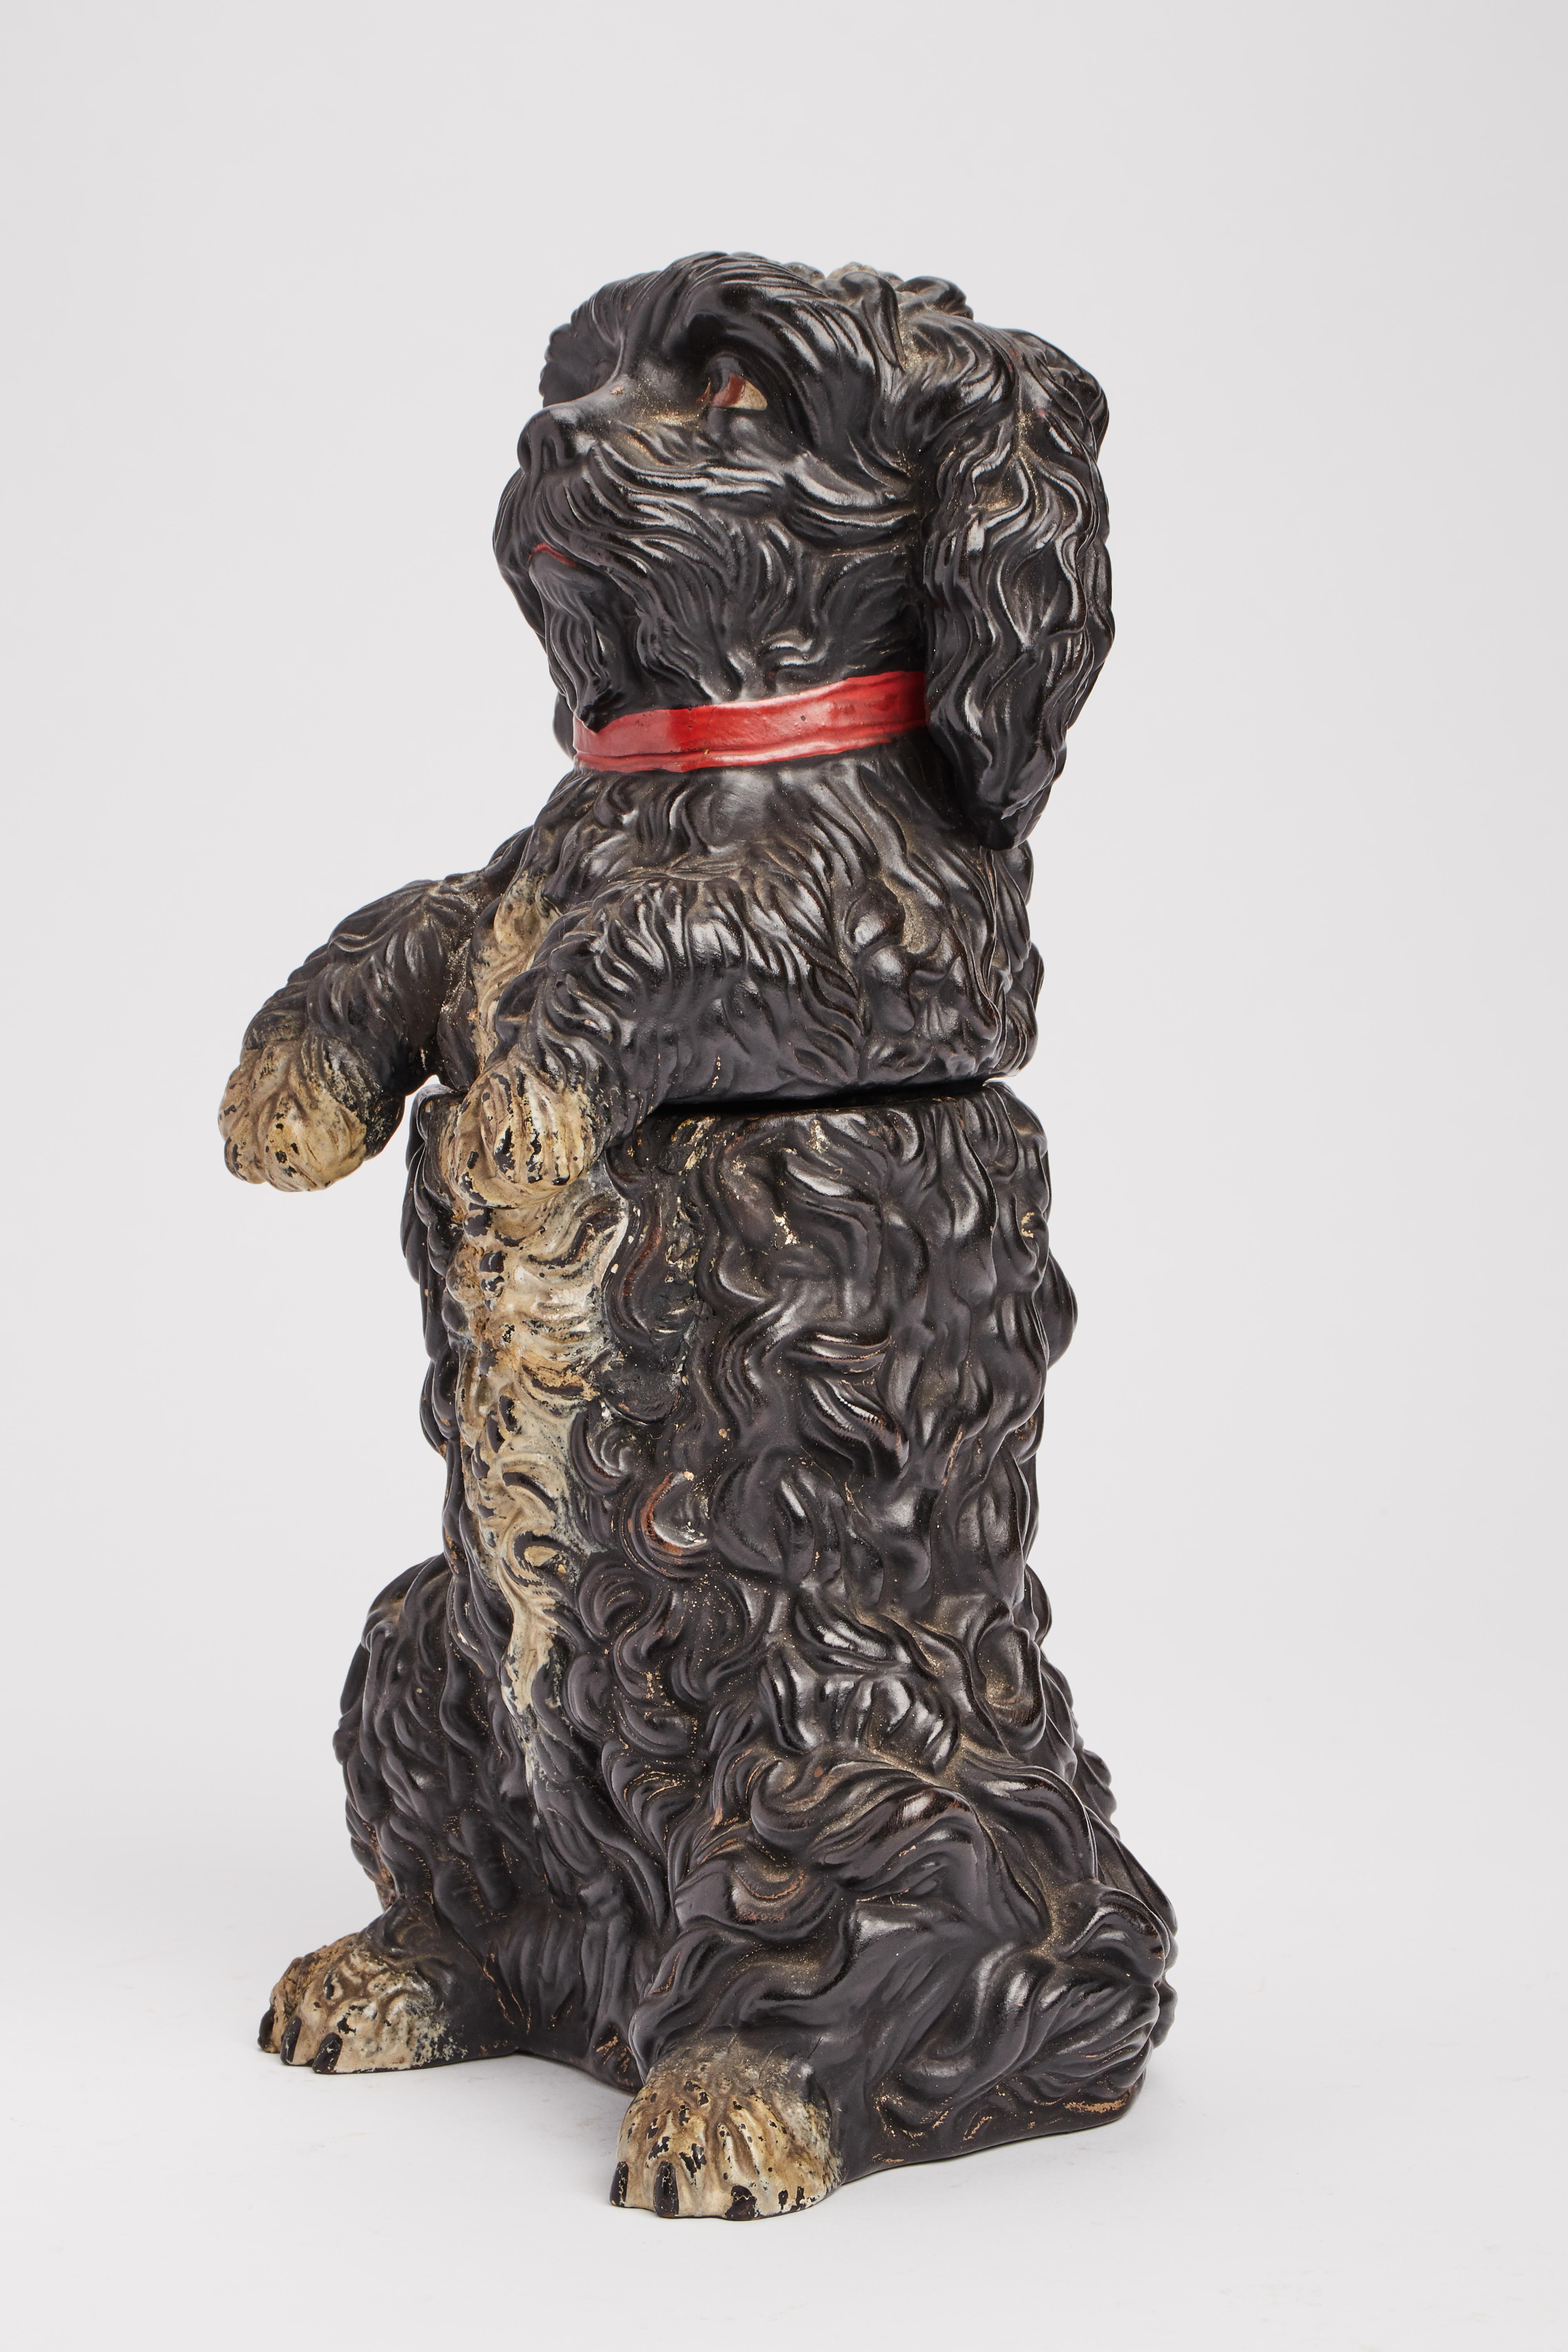 Painted terracotta sculpture, depicting a black poodle dog with a red collar, acting as a tobacco holder. Austria circa 1880.